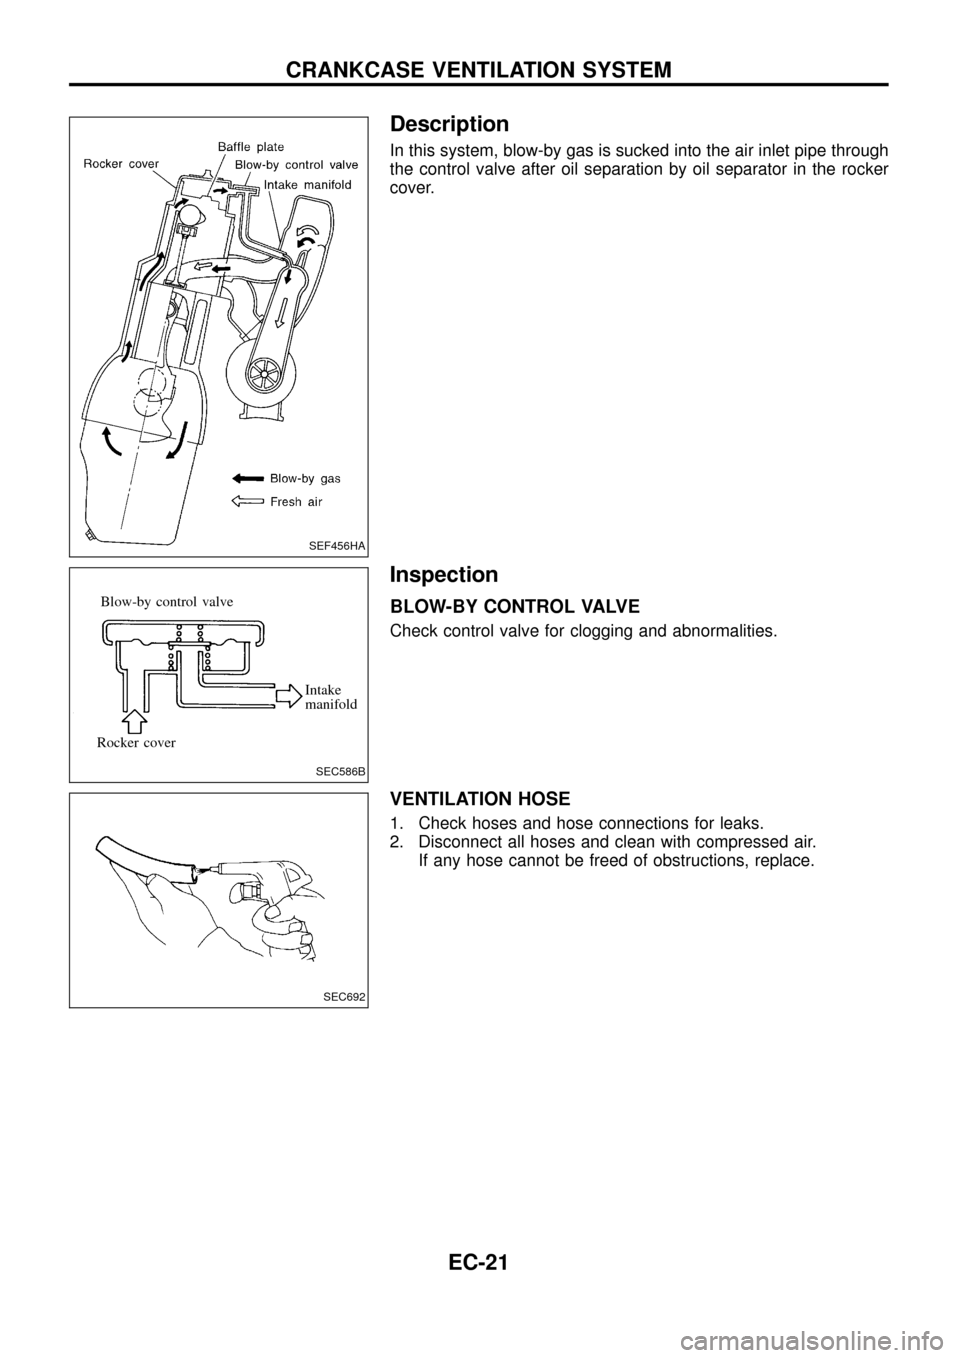 NISSAN PATROL 1998 Y61 / 5.G Engine Control Workshop Manual Description
In this system, blow-by gas is sucked into the air inlet pipe through
the control valve after oil separation by oil separator in the rocker
cover.
Inspection
BLOW-BY CONTROL VALVE
Check co